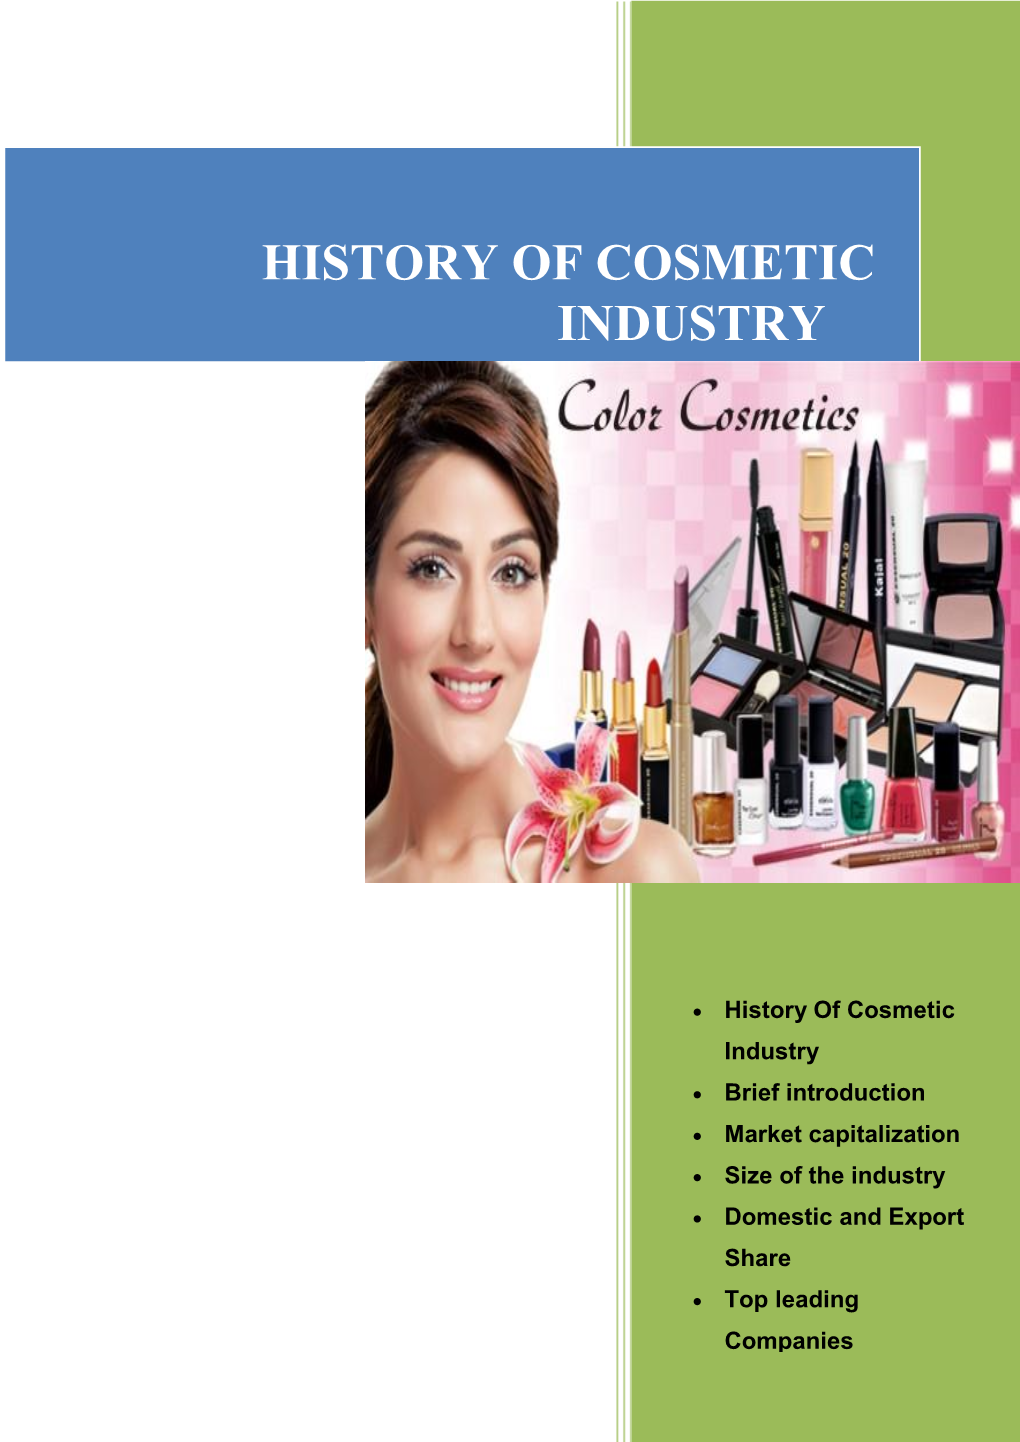 History of Cosmetic Industry